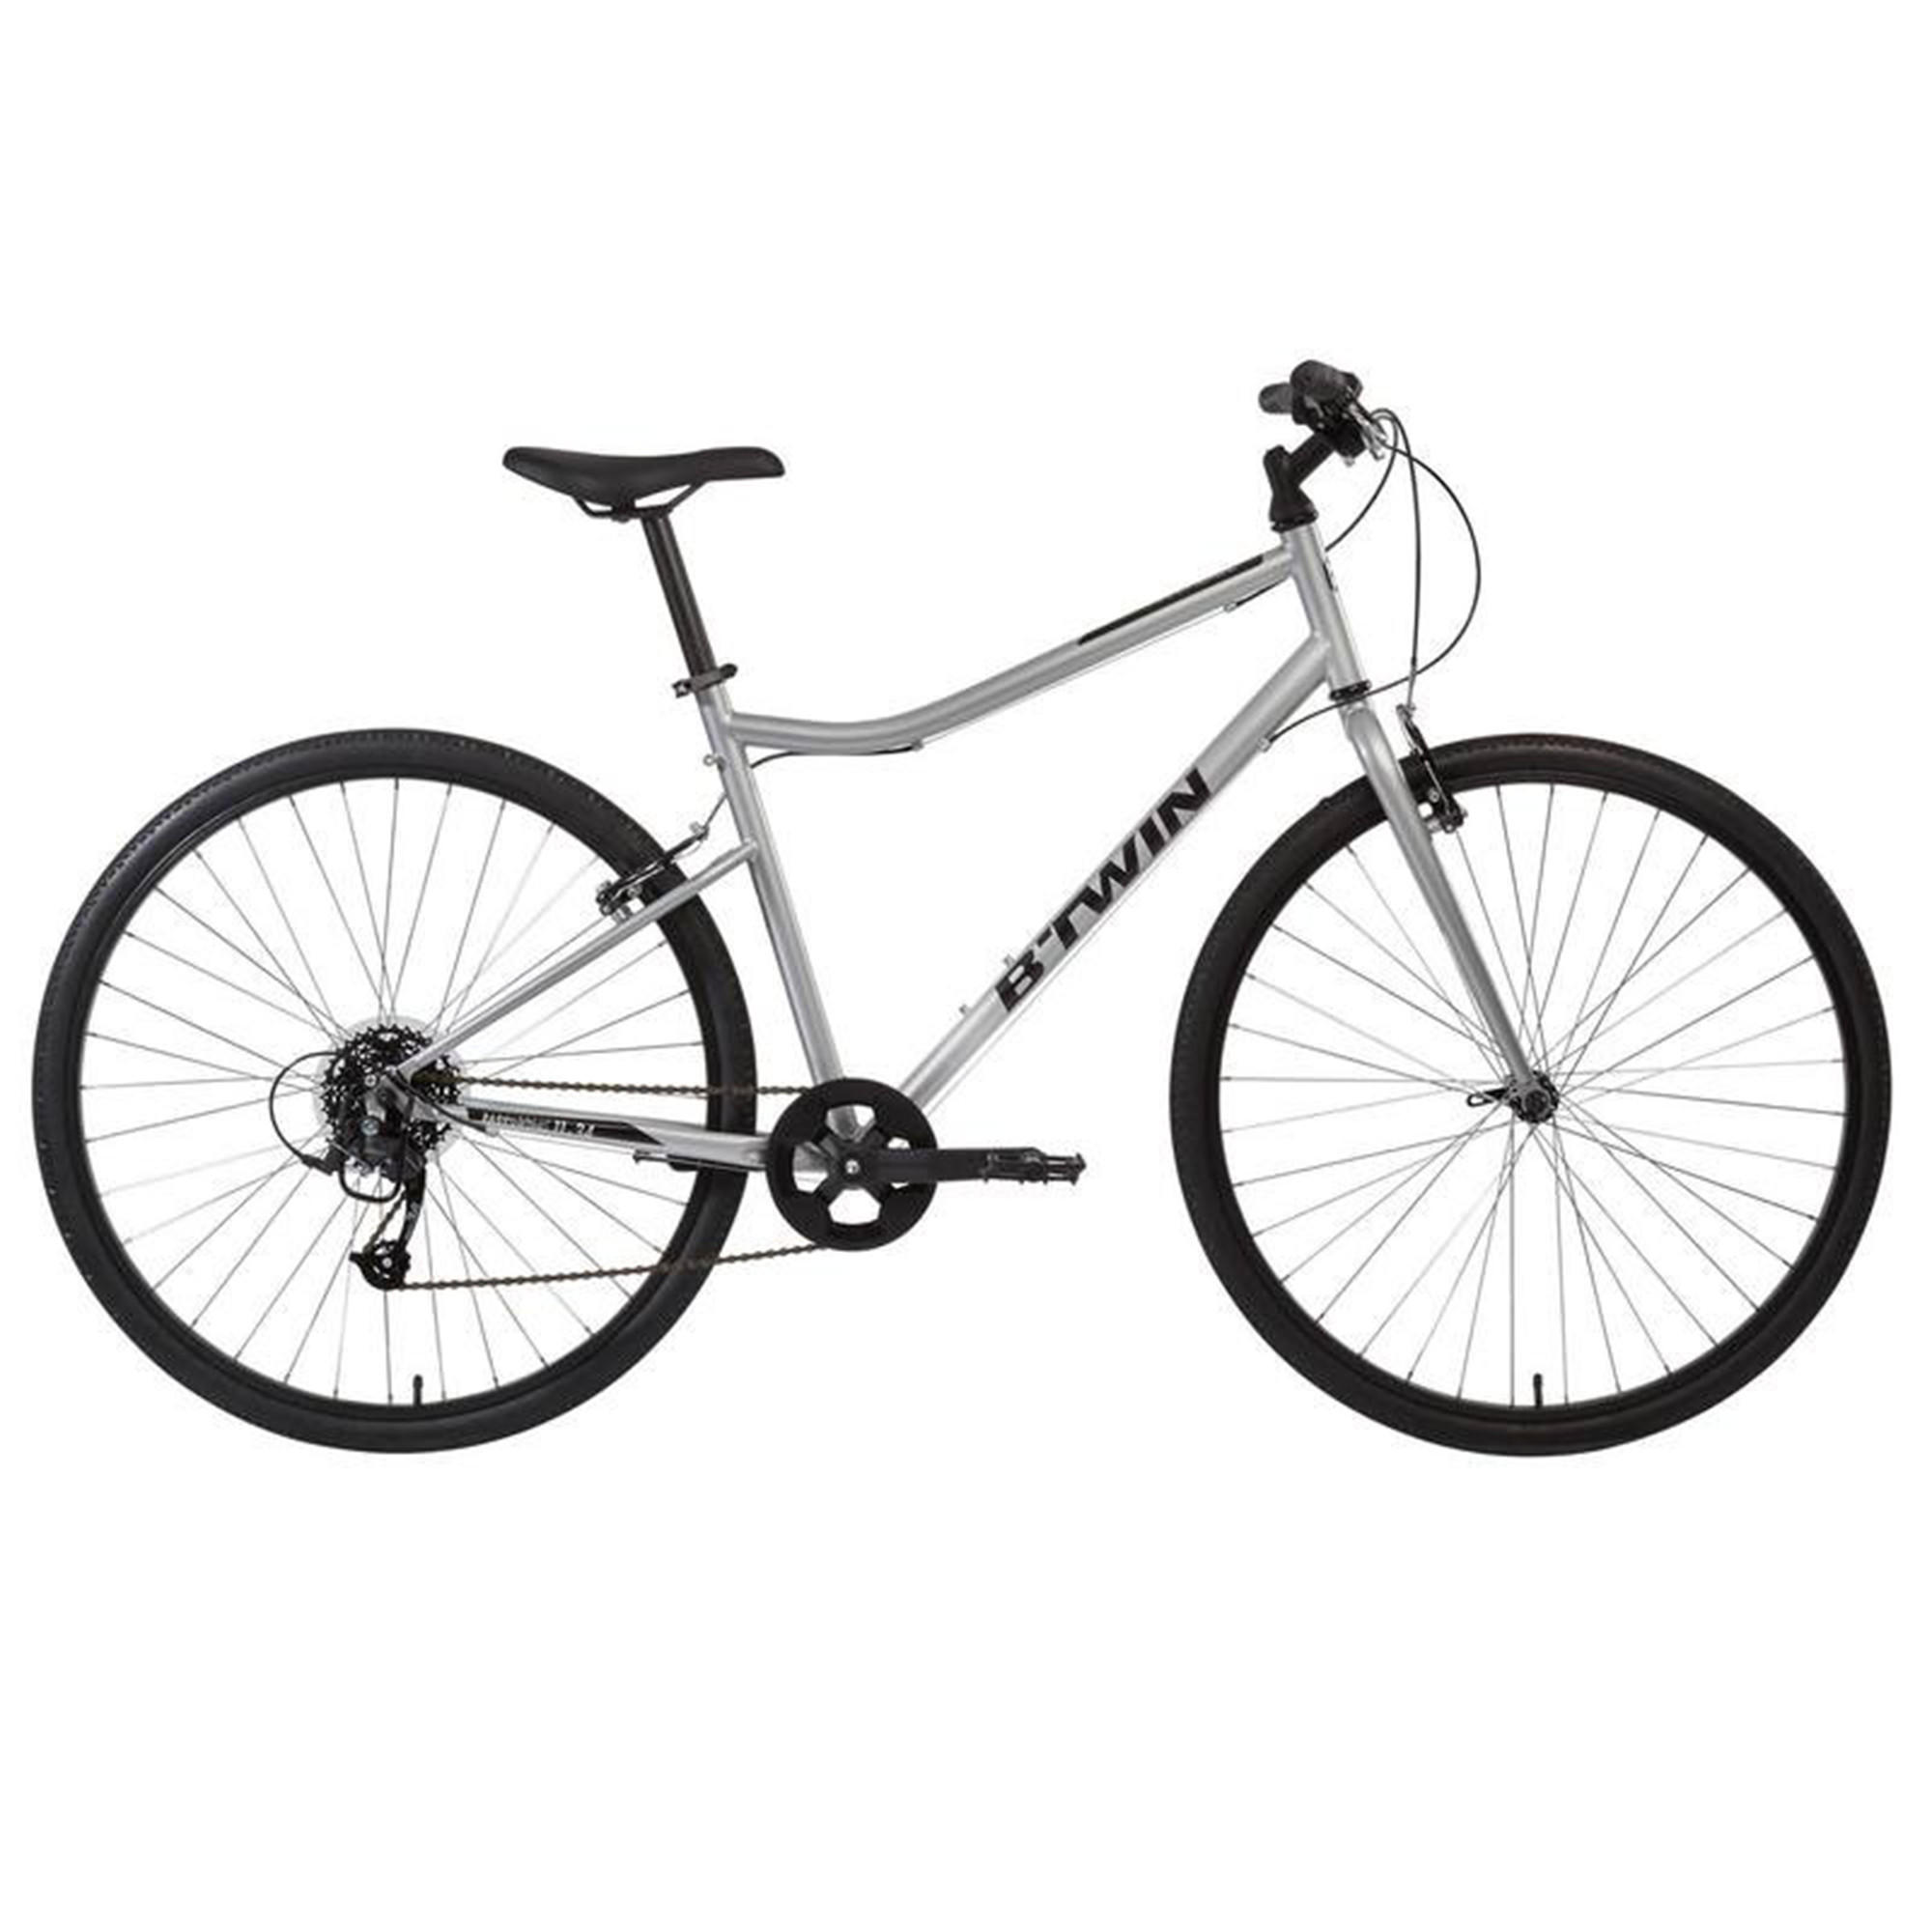 btwin riverside 100 hybrid cycle price